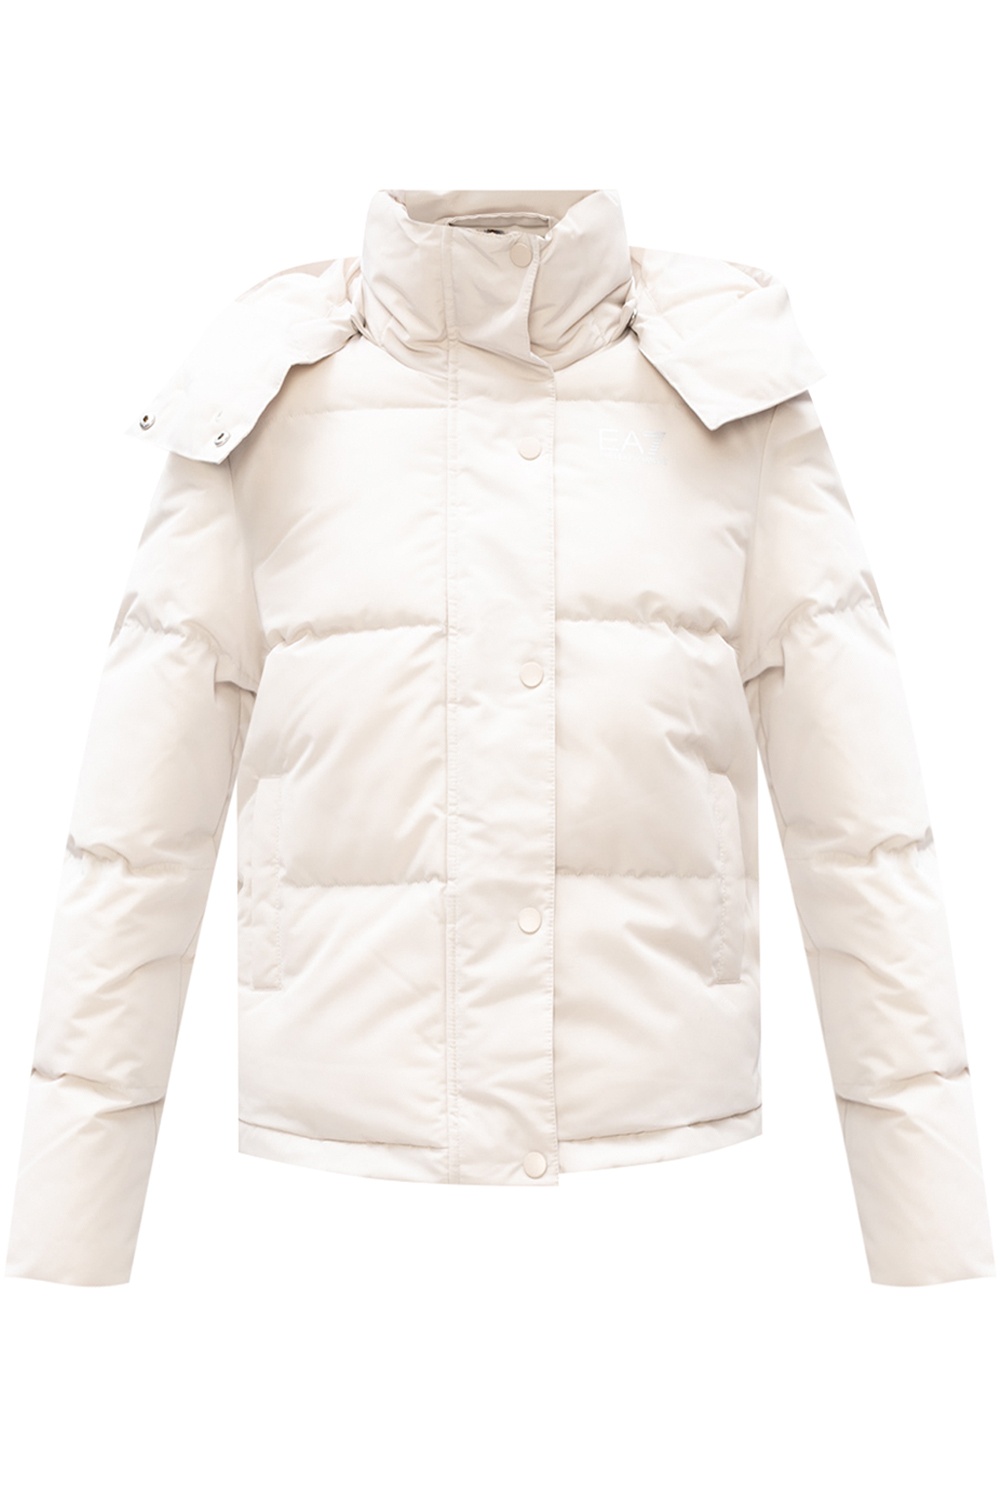 armani quilted jacket